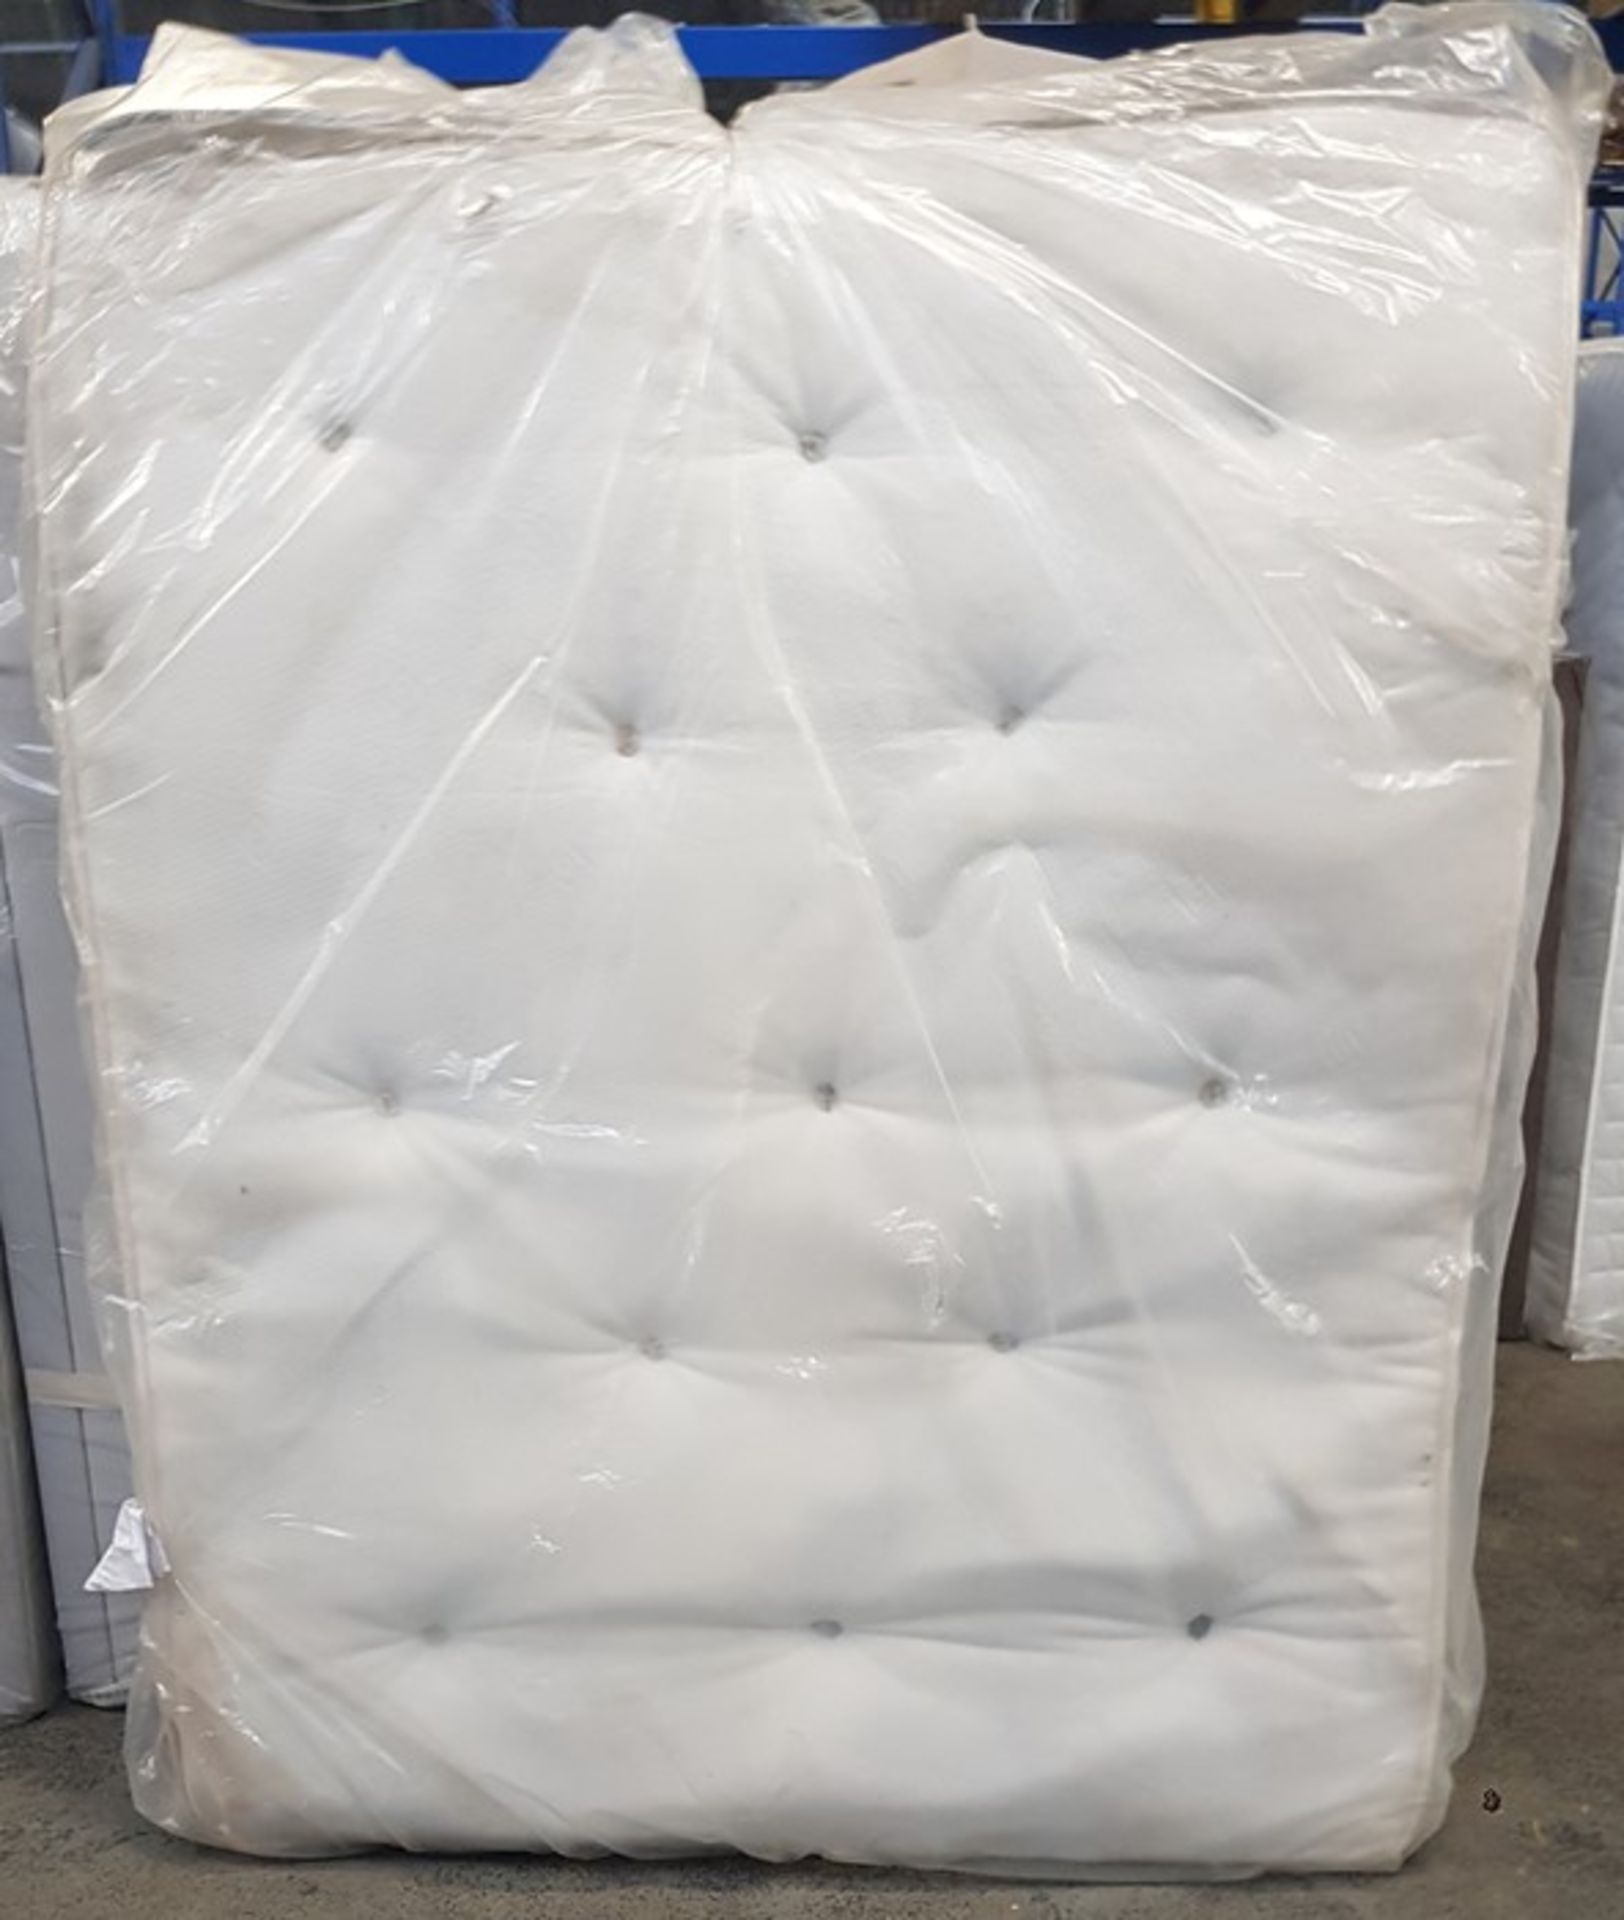 1 BAGGED 150CM KING SIZE POCKET SPRUNG MATTRESS / RRP £239.95 (PUBLIC VIEWING AVAILABLE)